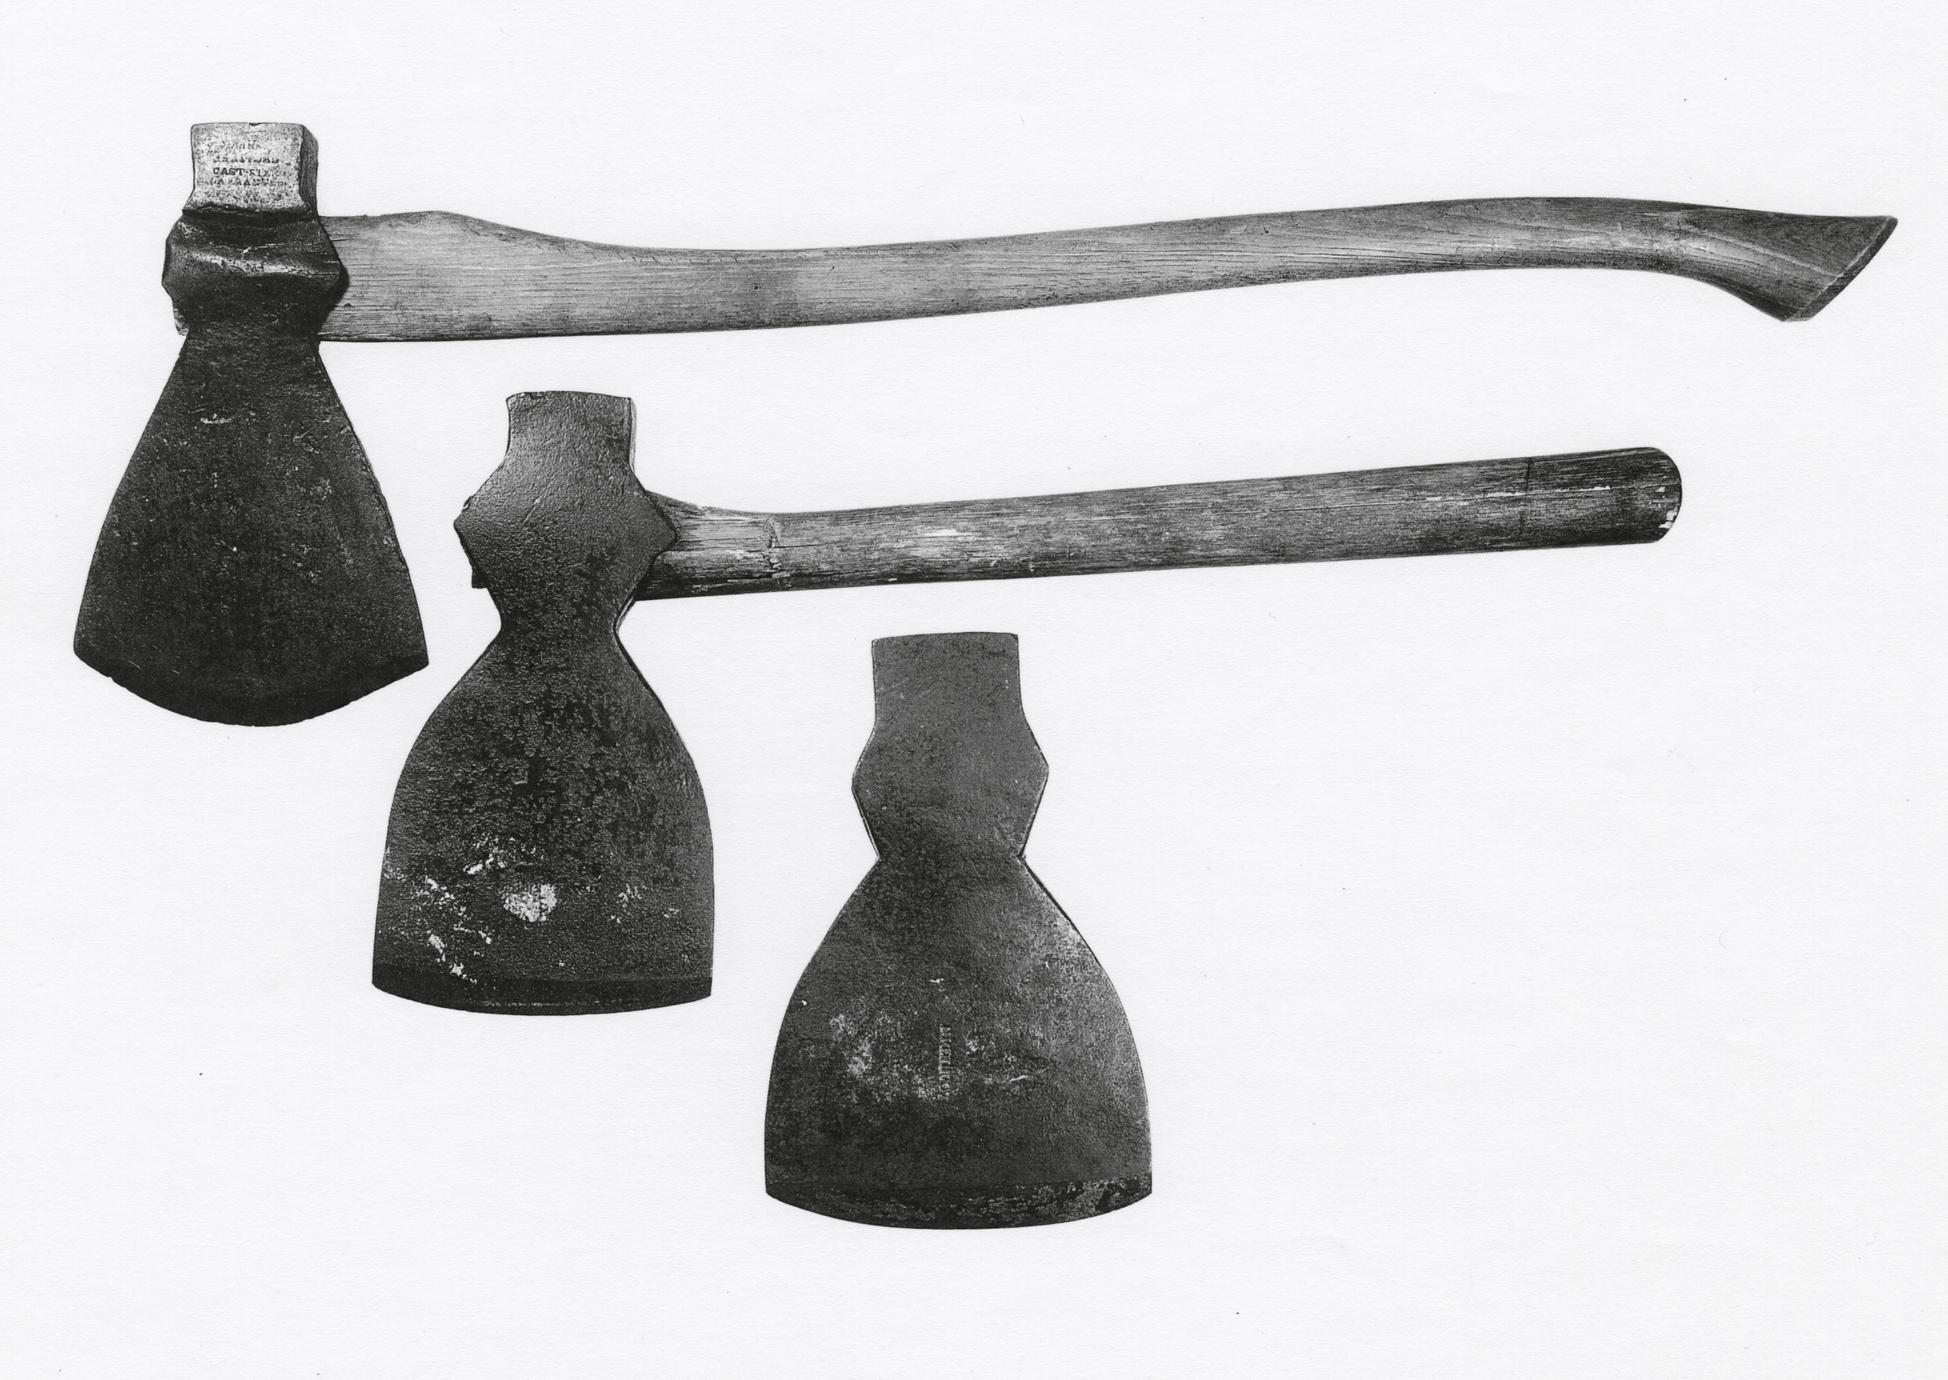 Black and white image of two axes with handles and one axe blade alone